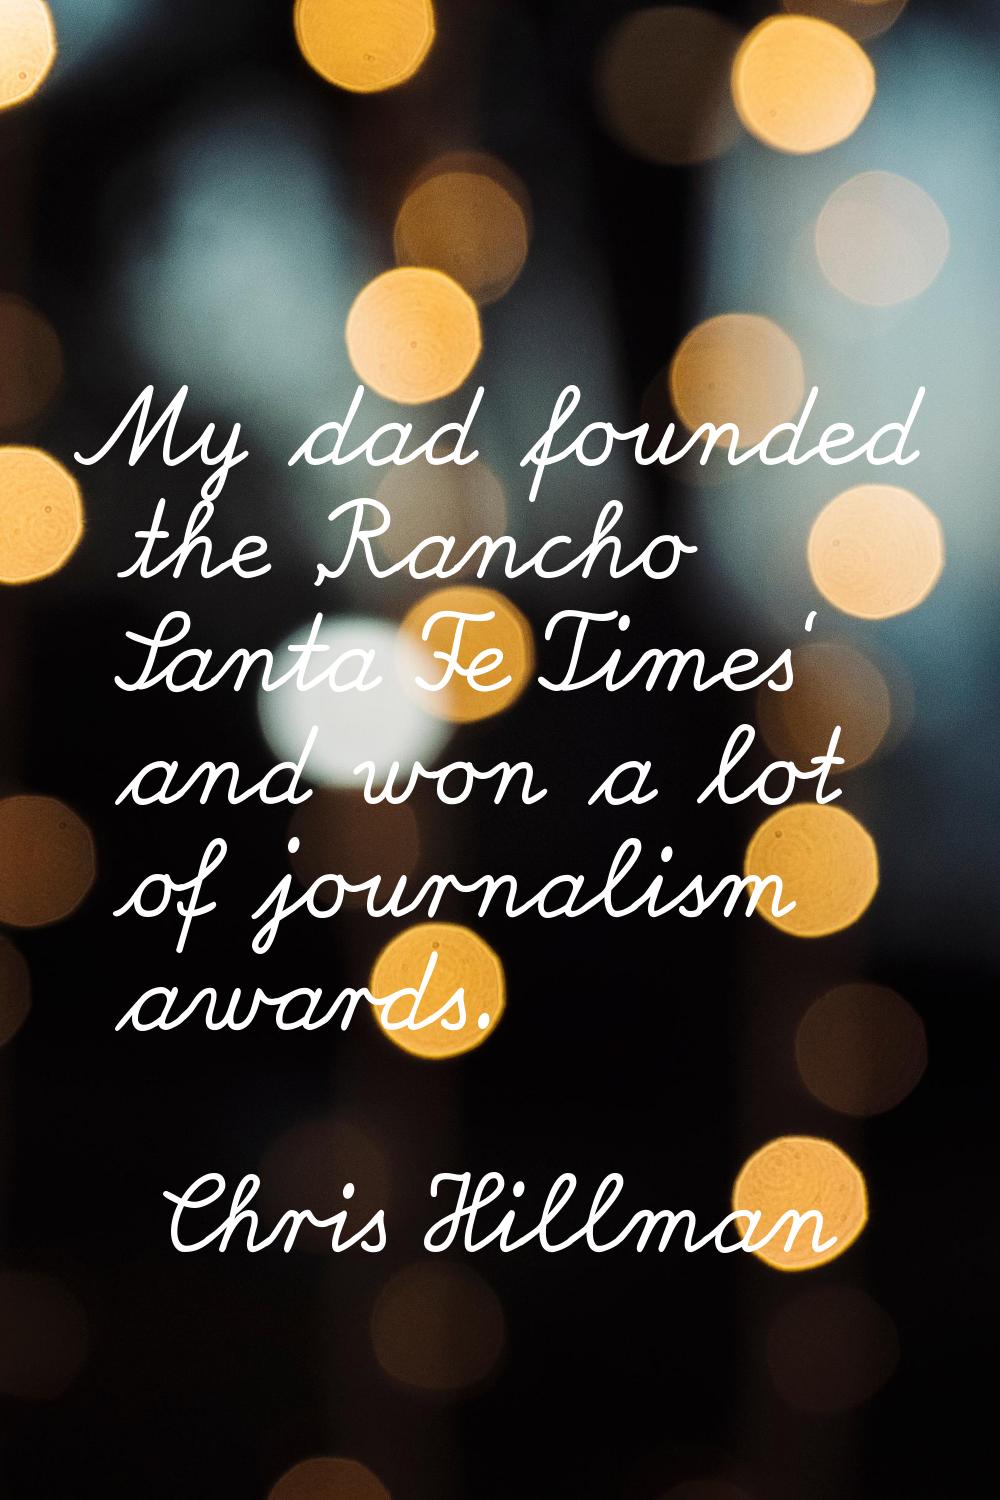 My dad founded the 'Rancho Santa Fe Times' and won a lot of journalism awards.